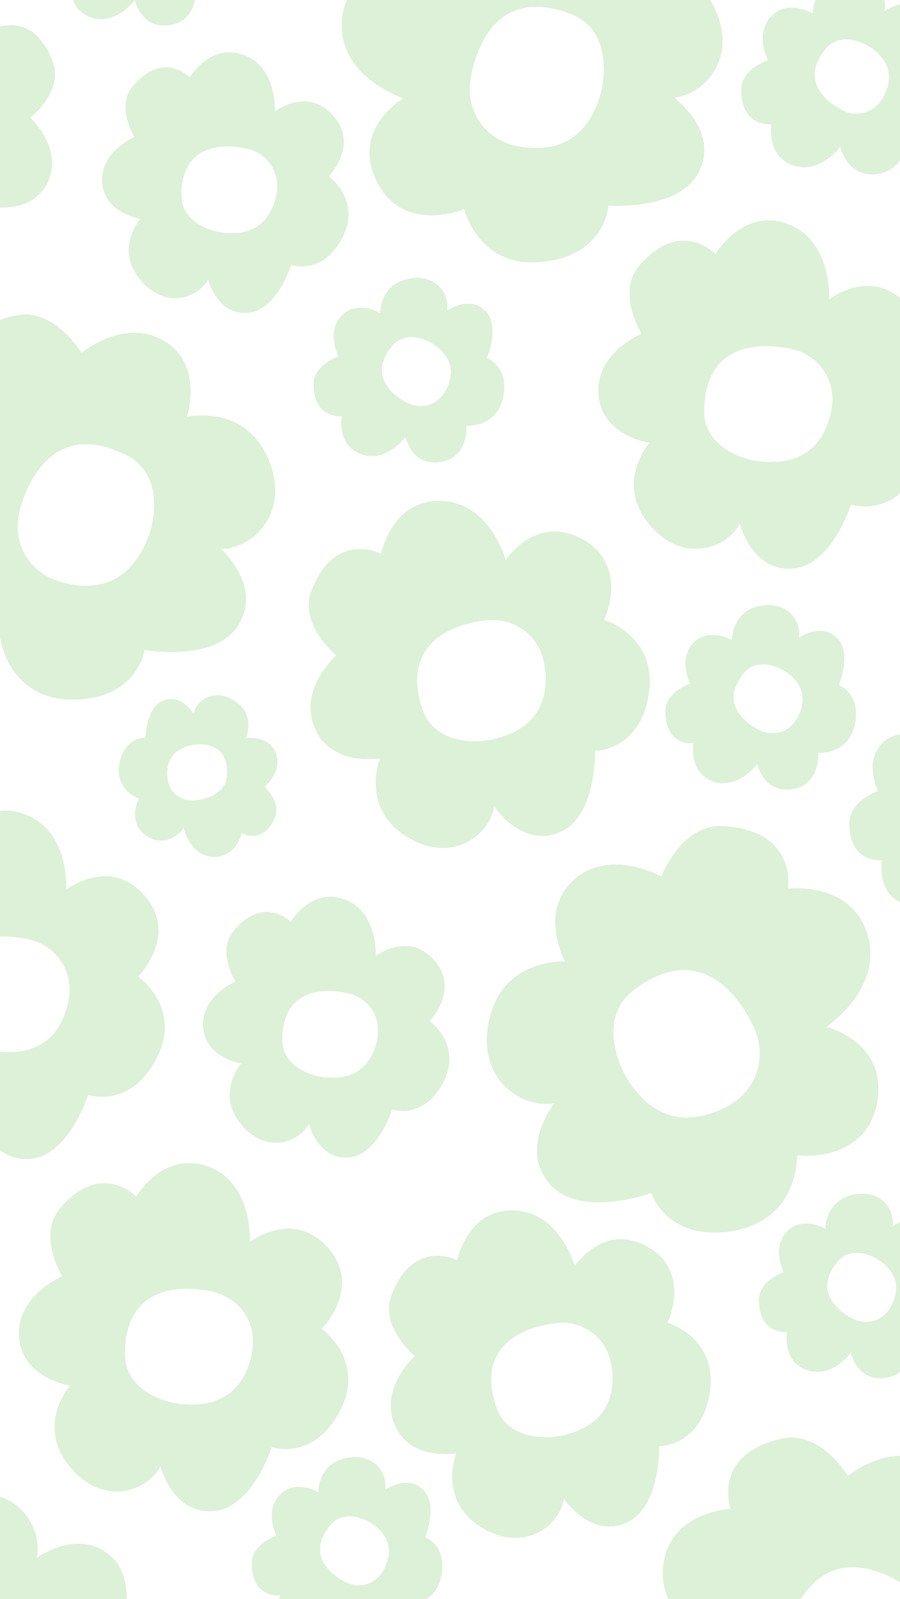 Customize Spring Aesthetic Phone Wallpaper Templates Online